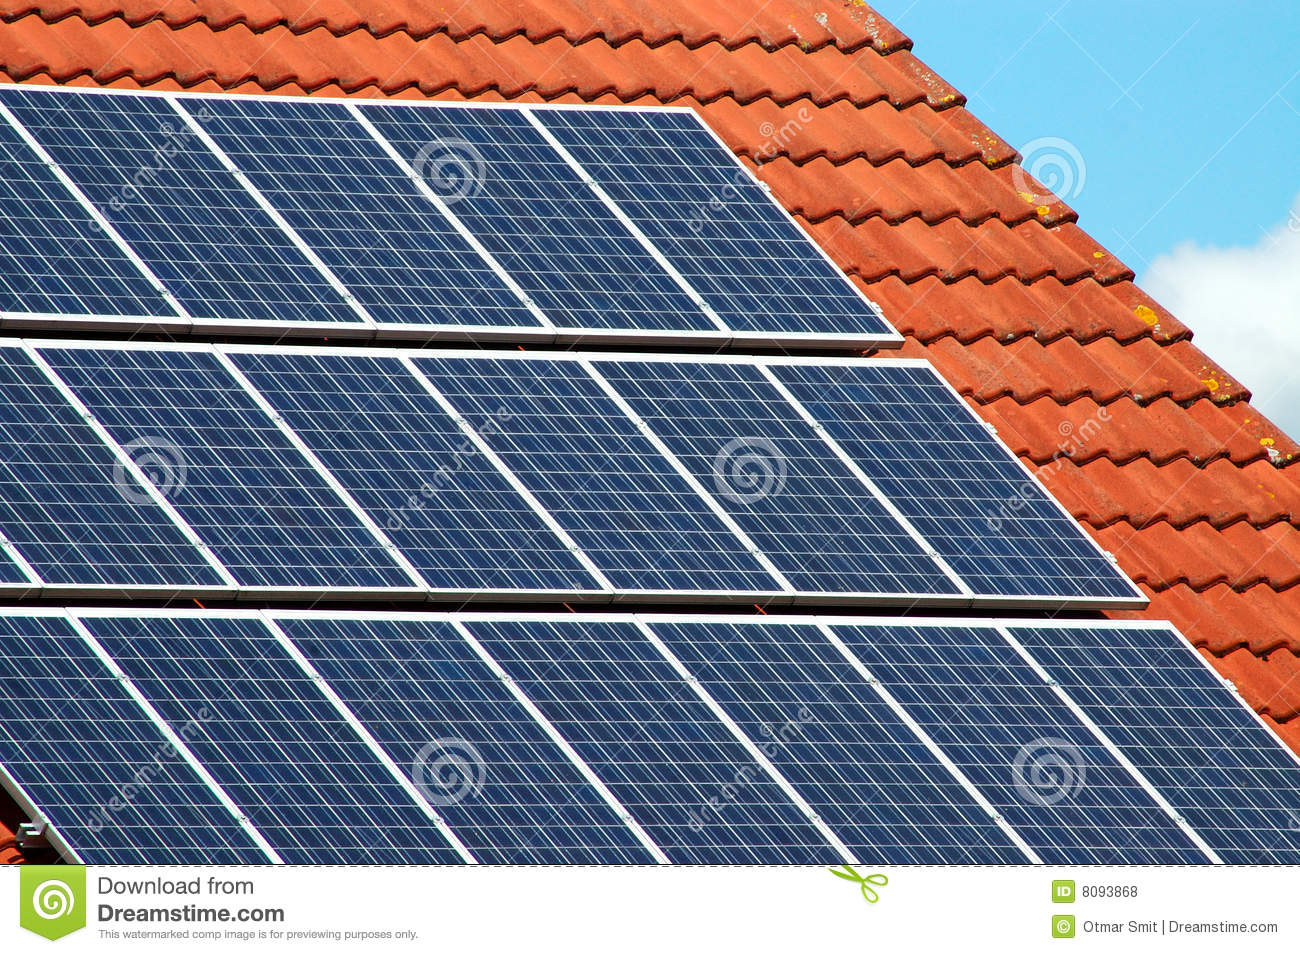 Solar Panels Of A Roofing Tile Stock Photo